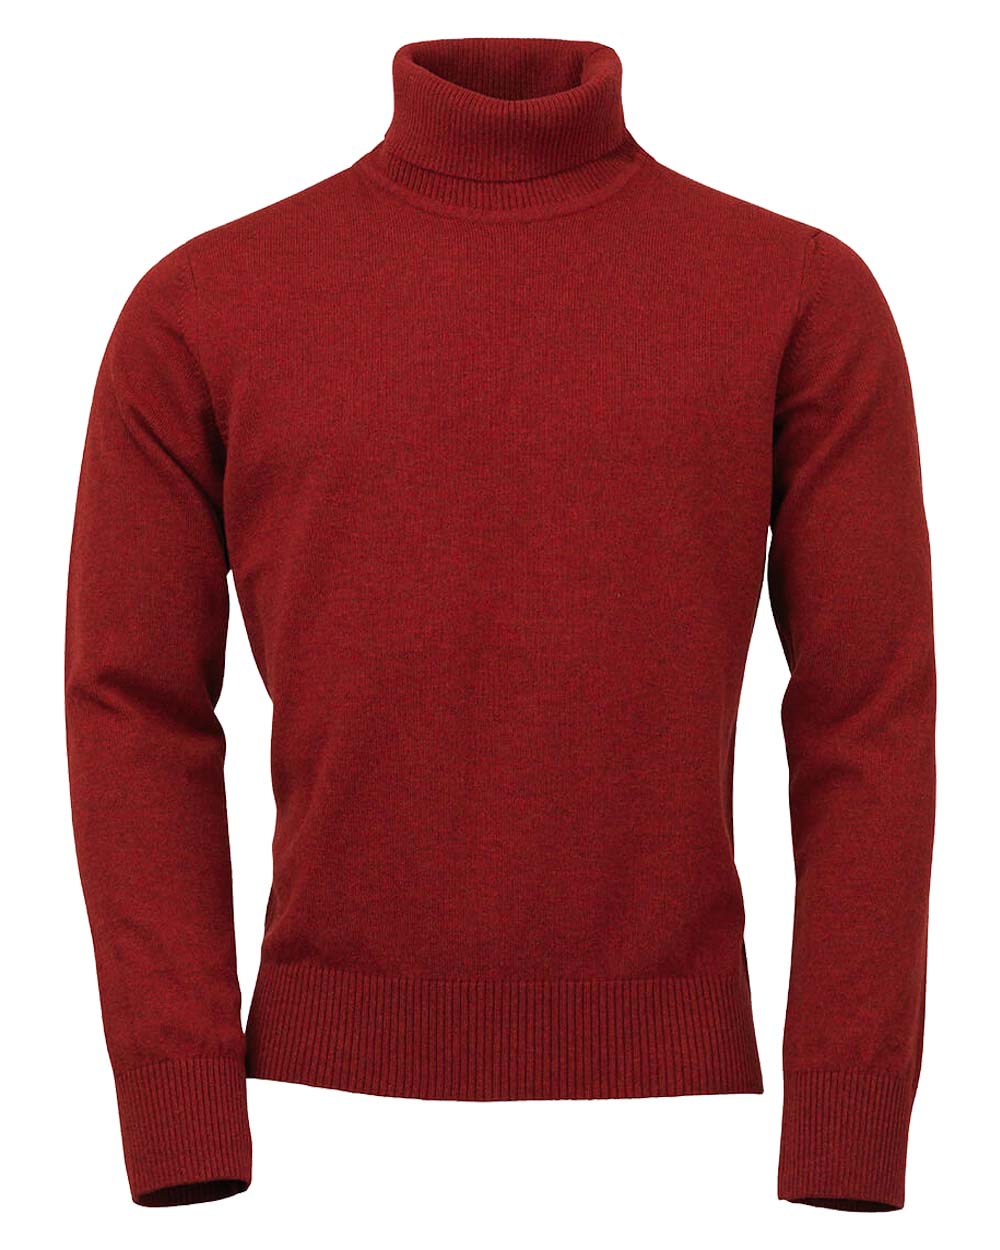 Old Red coloured Laksen Trool Lamswool Rollneck Sweater on White background 